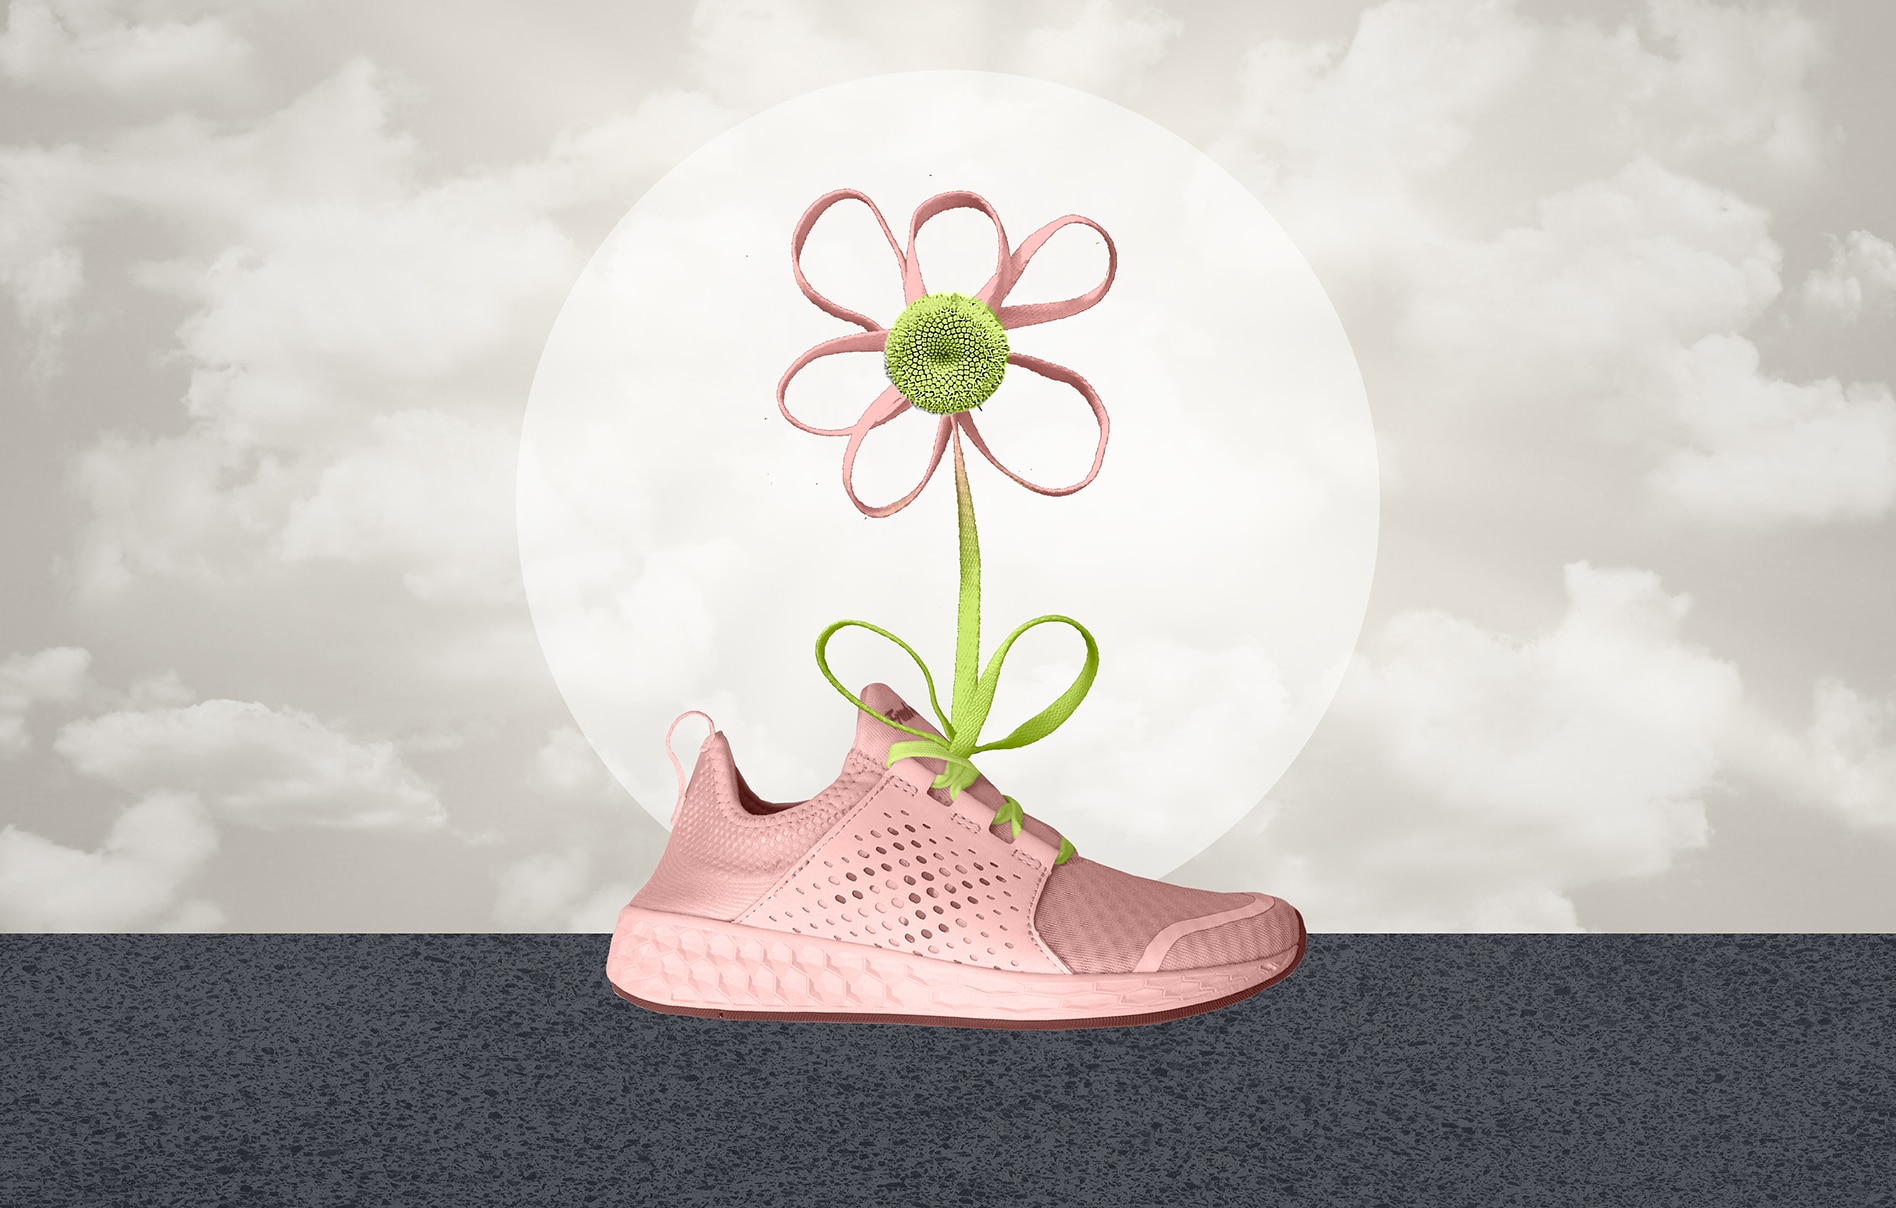 The shoelace of an athletic sneaker forms a flower